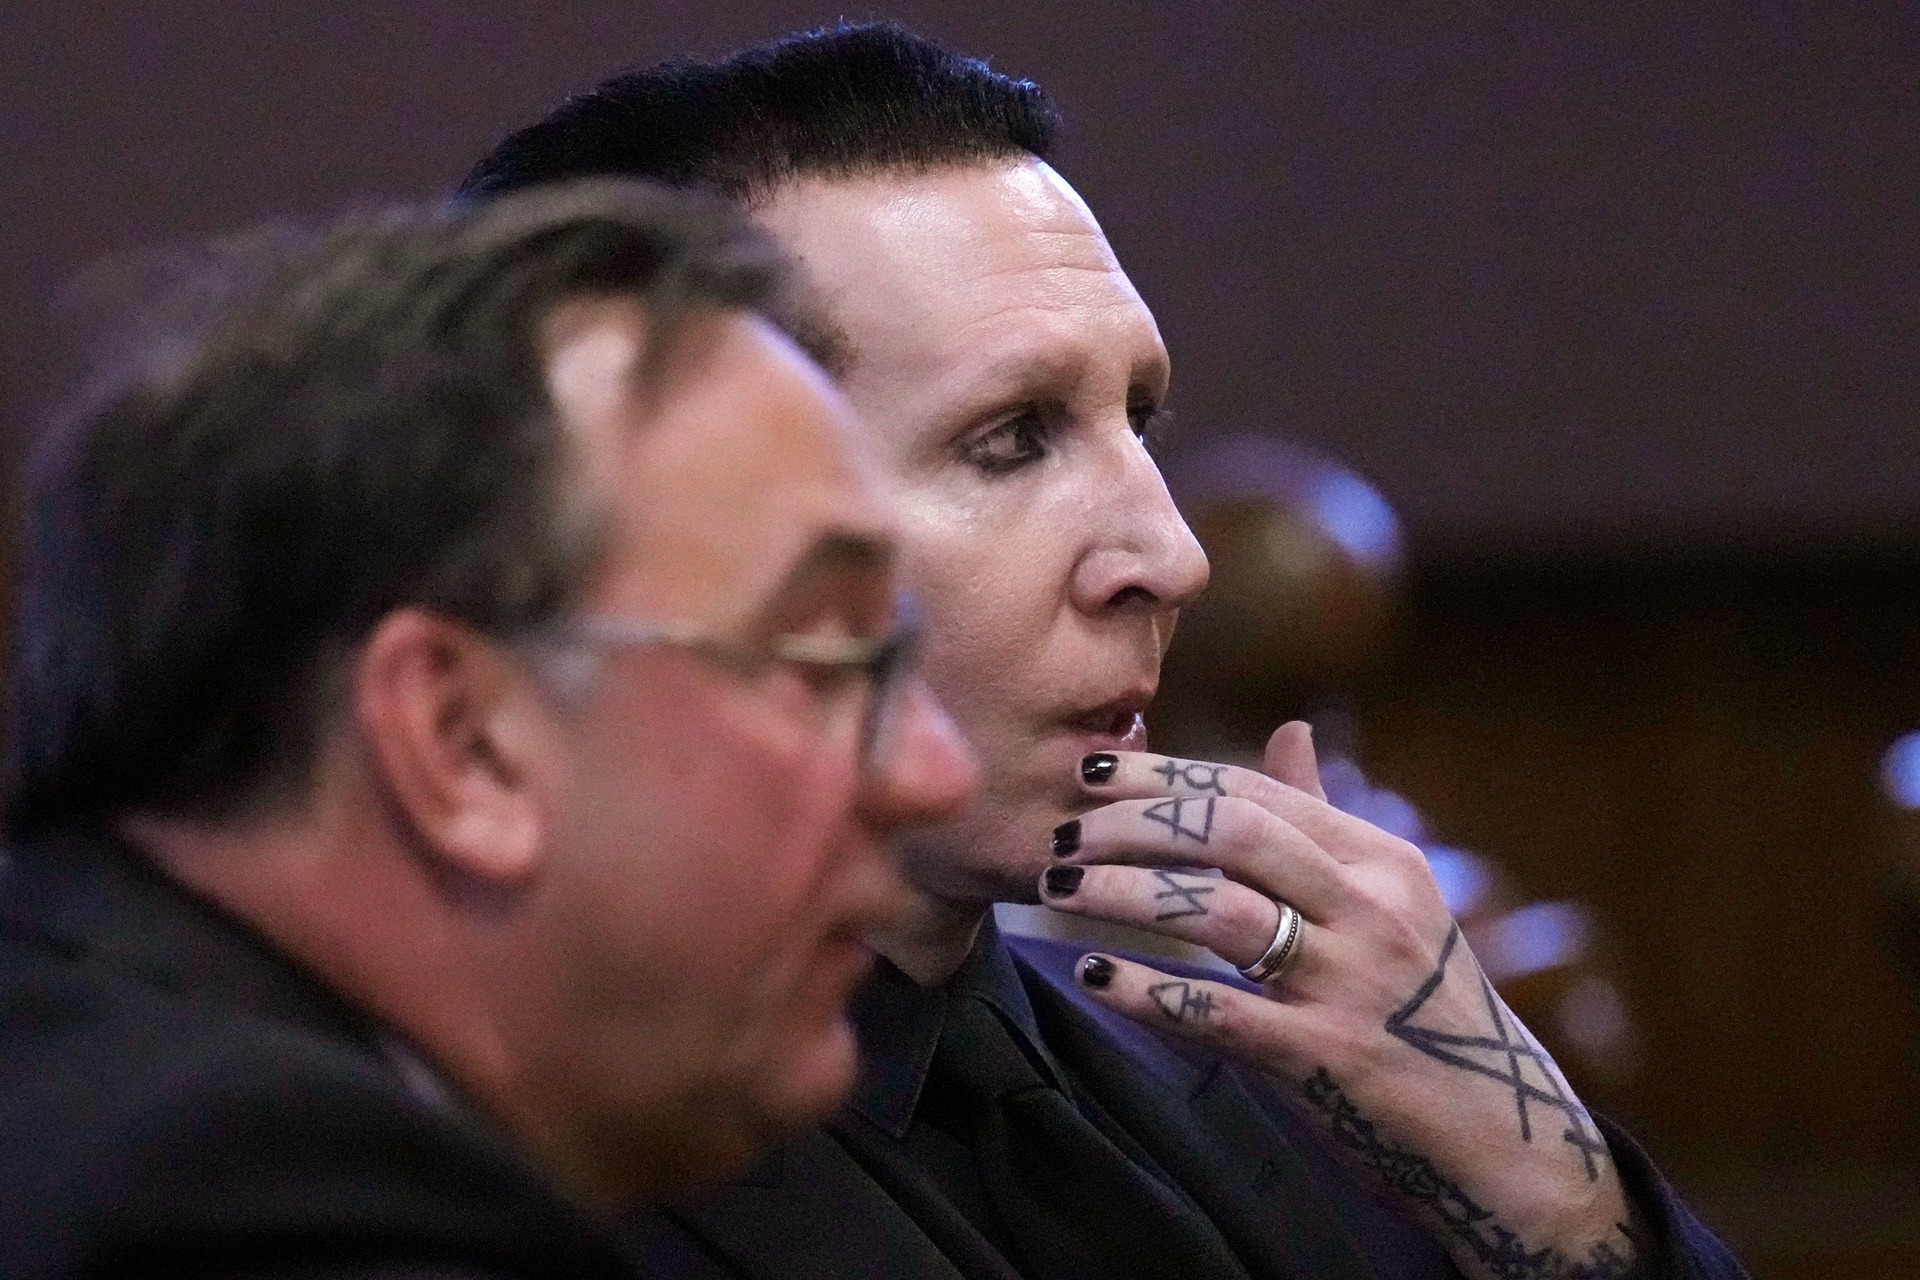 Marilyn Manson, whose legal name is Brian Hugh Warner, right, sits with his lawyer Kent Barker during an appearance in Belknap Superior Court on Monday (Charles Krupa/AP/PA)
